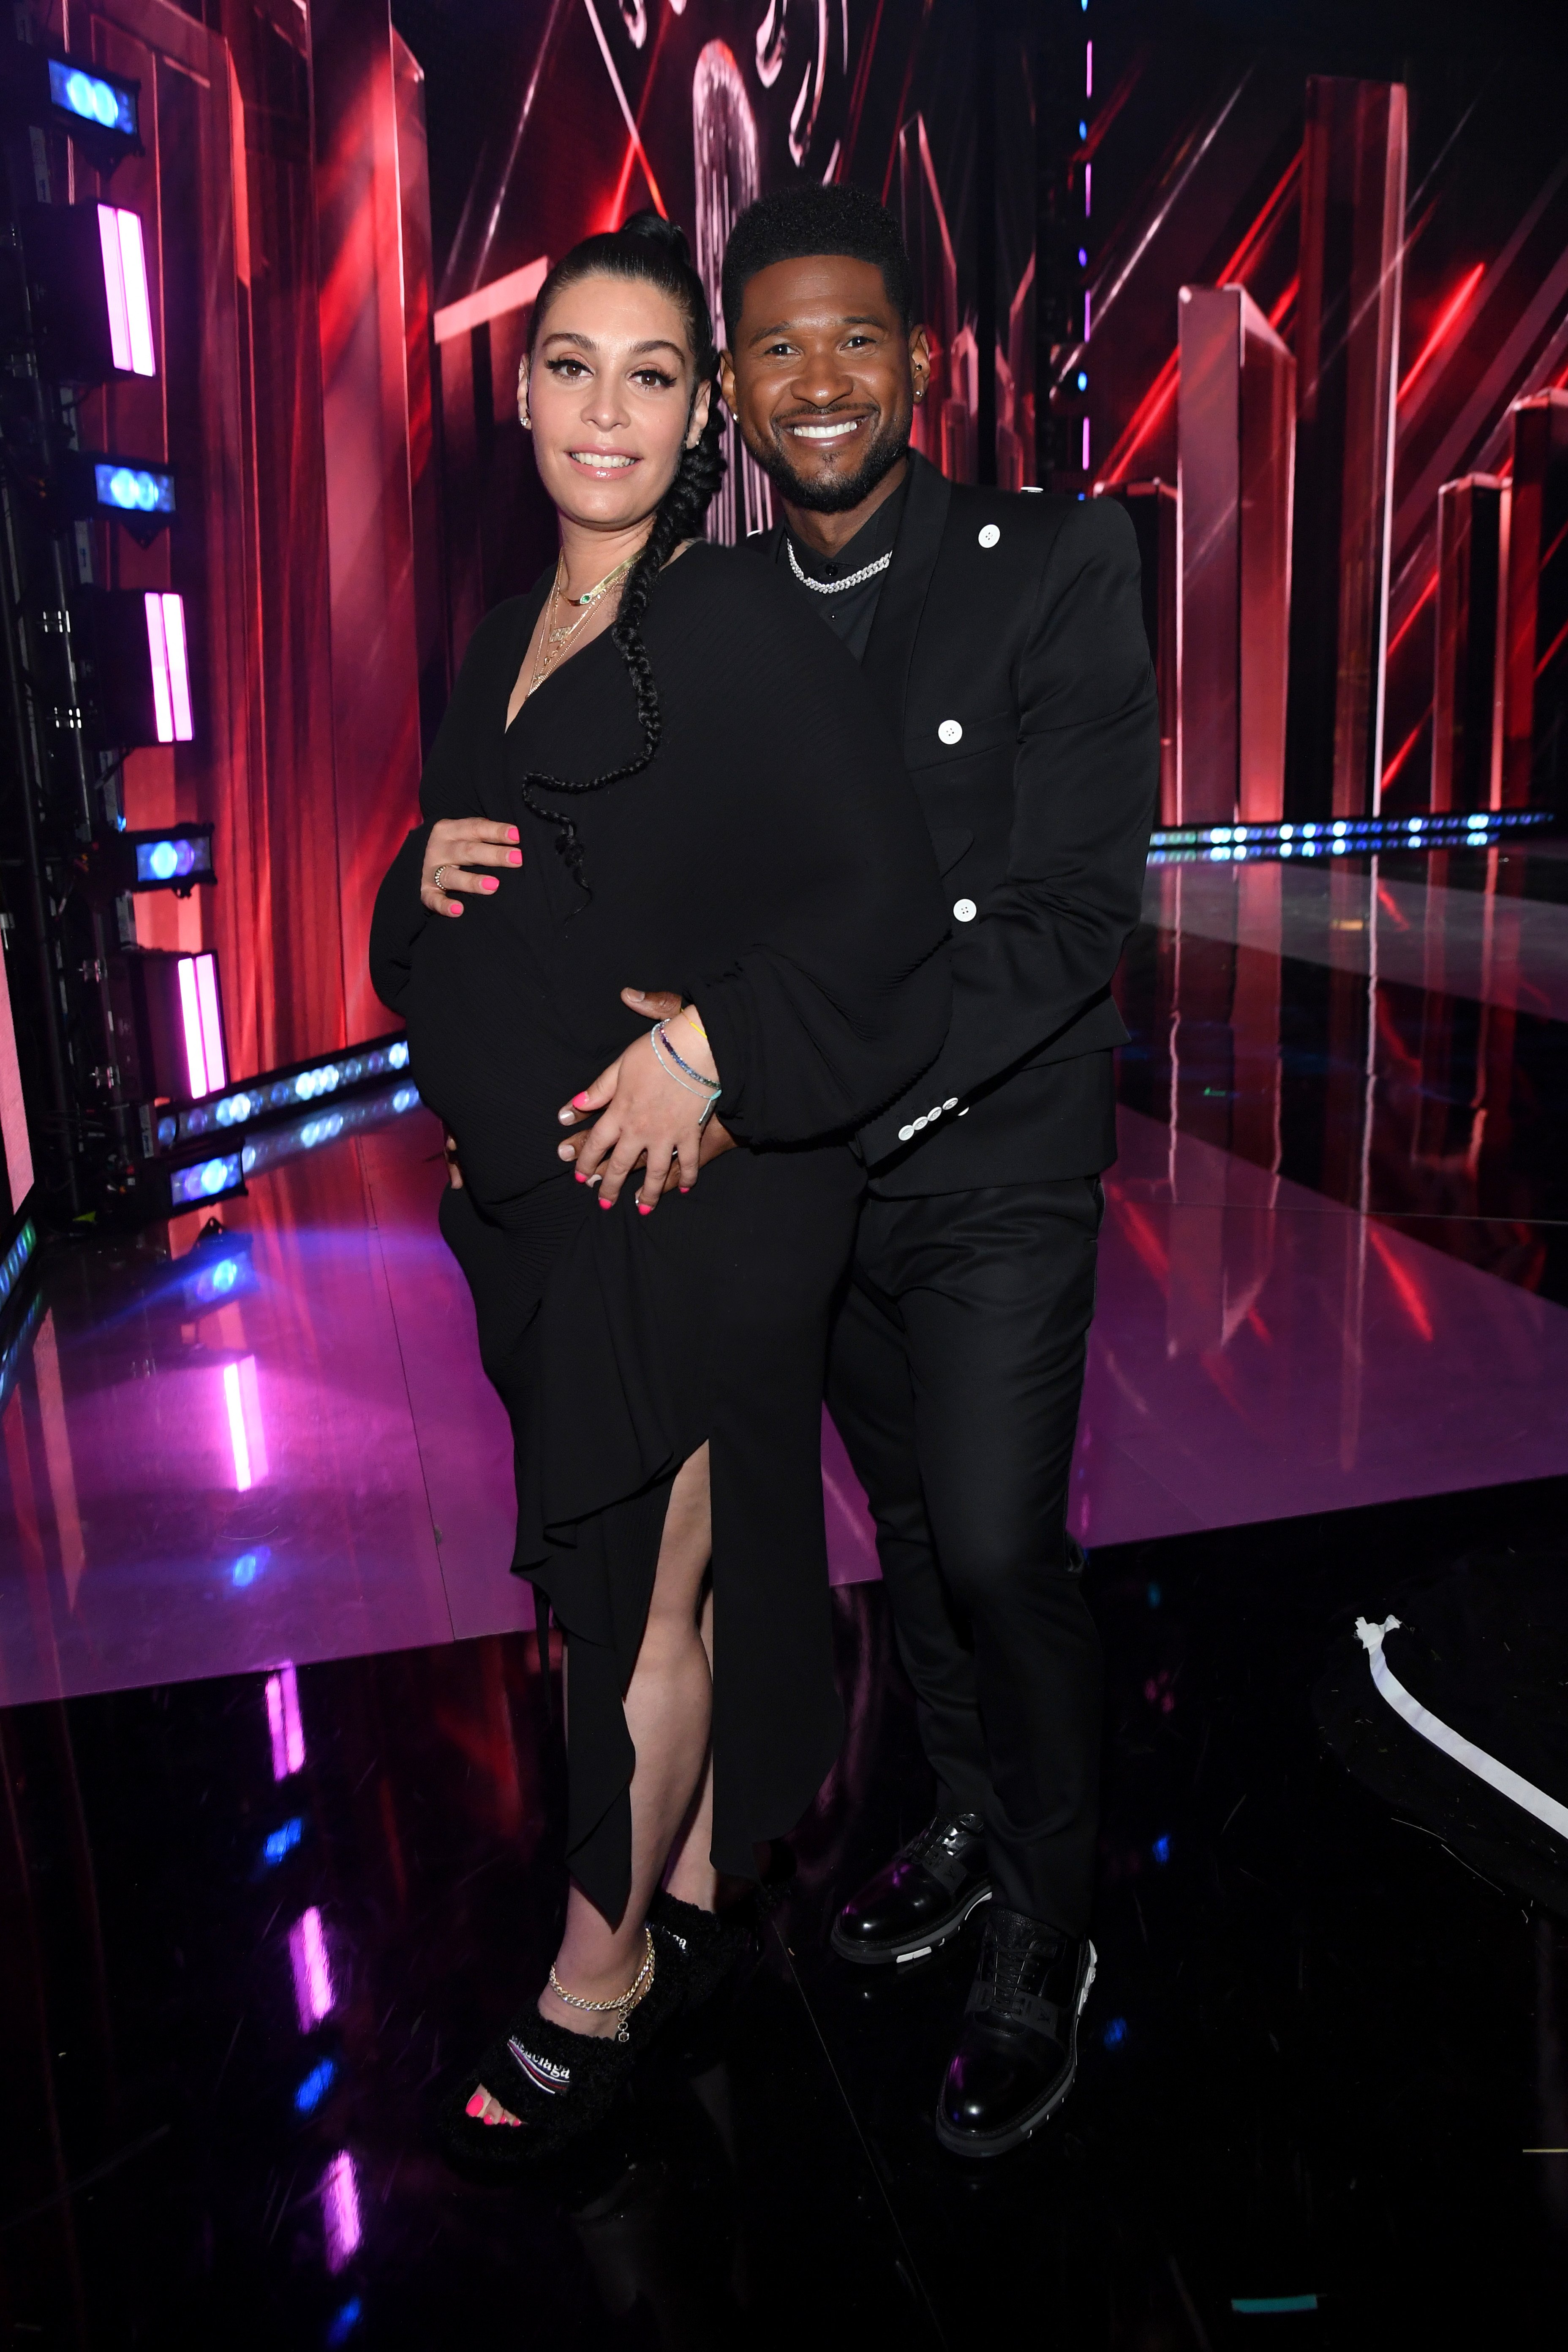 Jennifer Goicoechea and Usher attend the 2021 iHeartRadio Music Awards at The Dolby Theatre in Los Angeles, California on May 27, 2021. | Photo: Getty Images